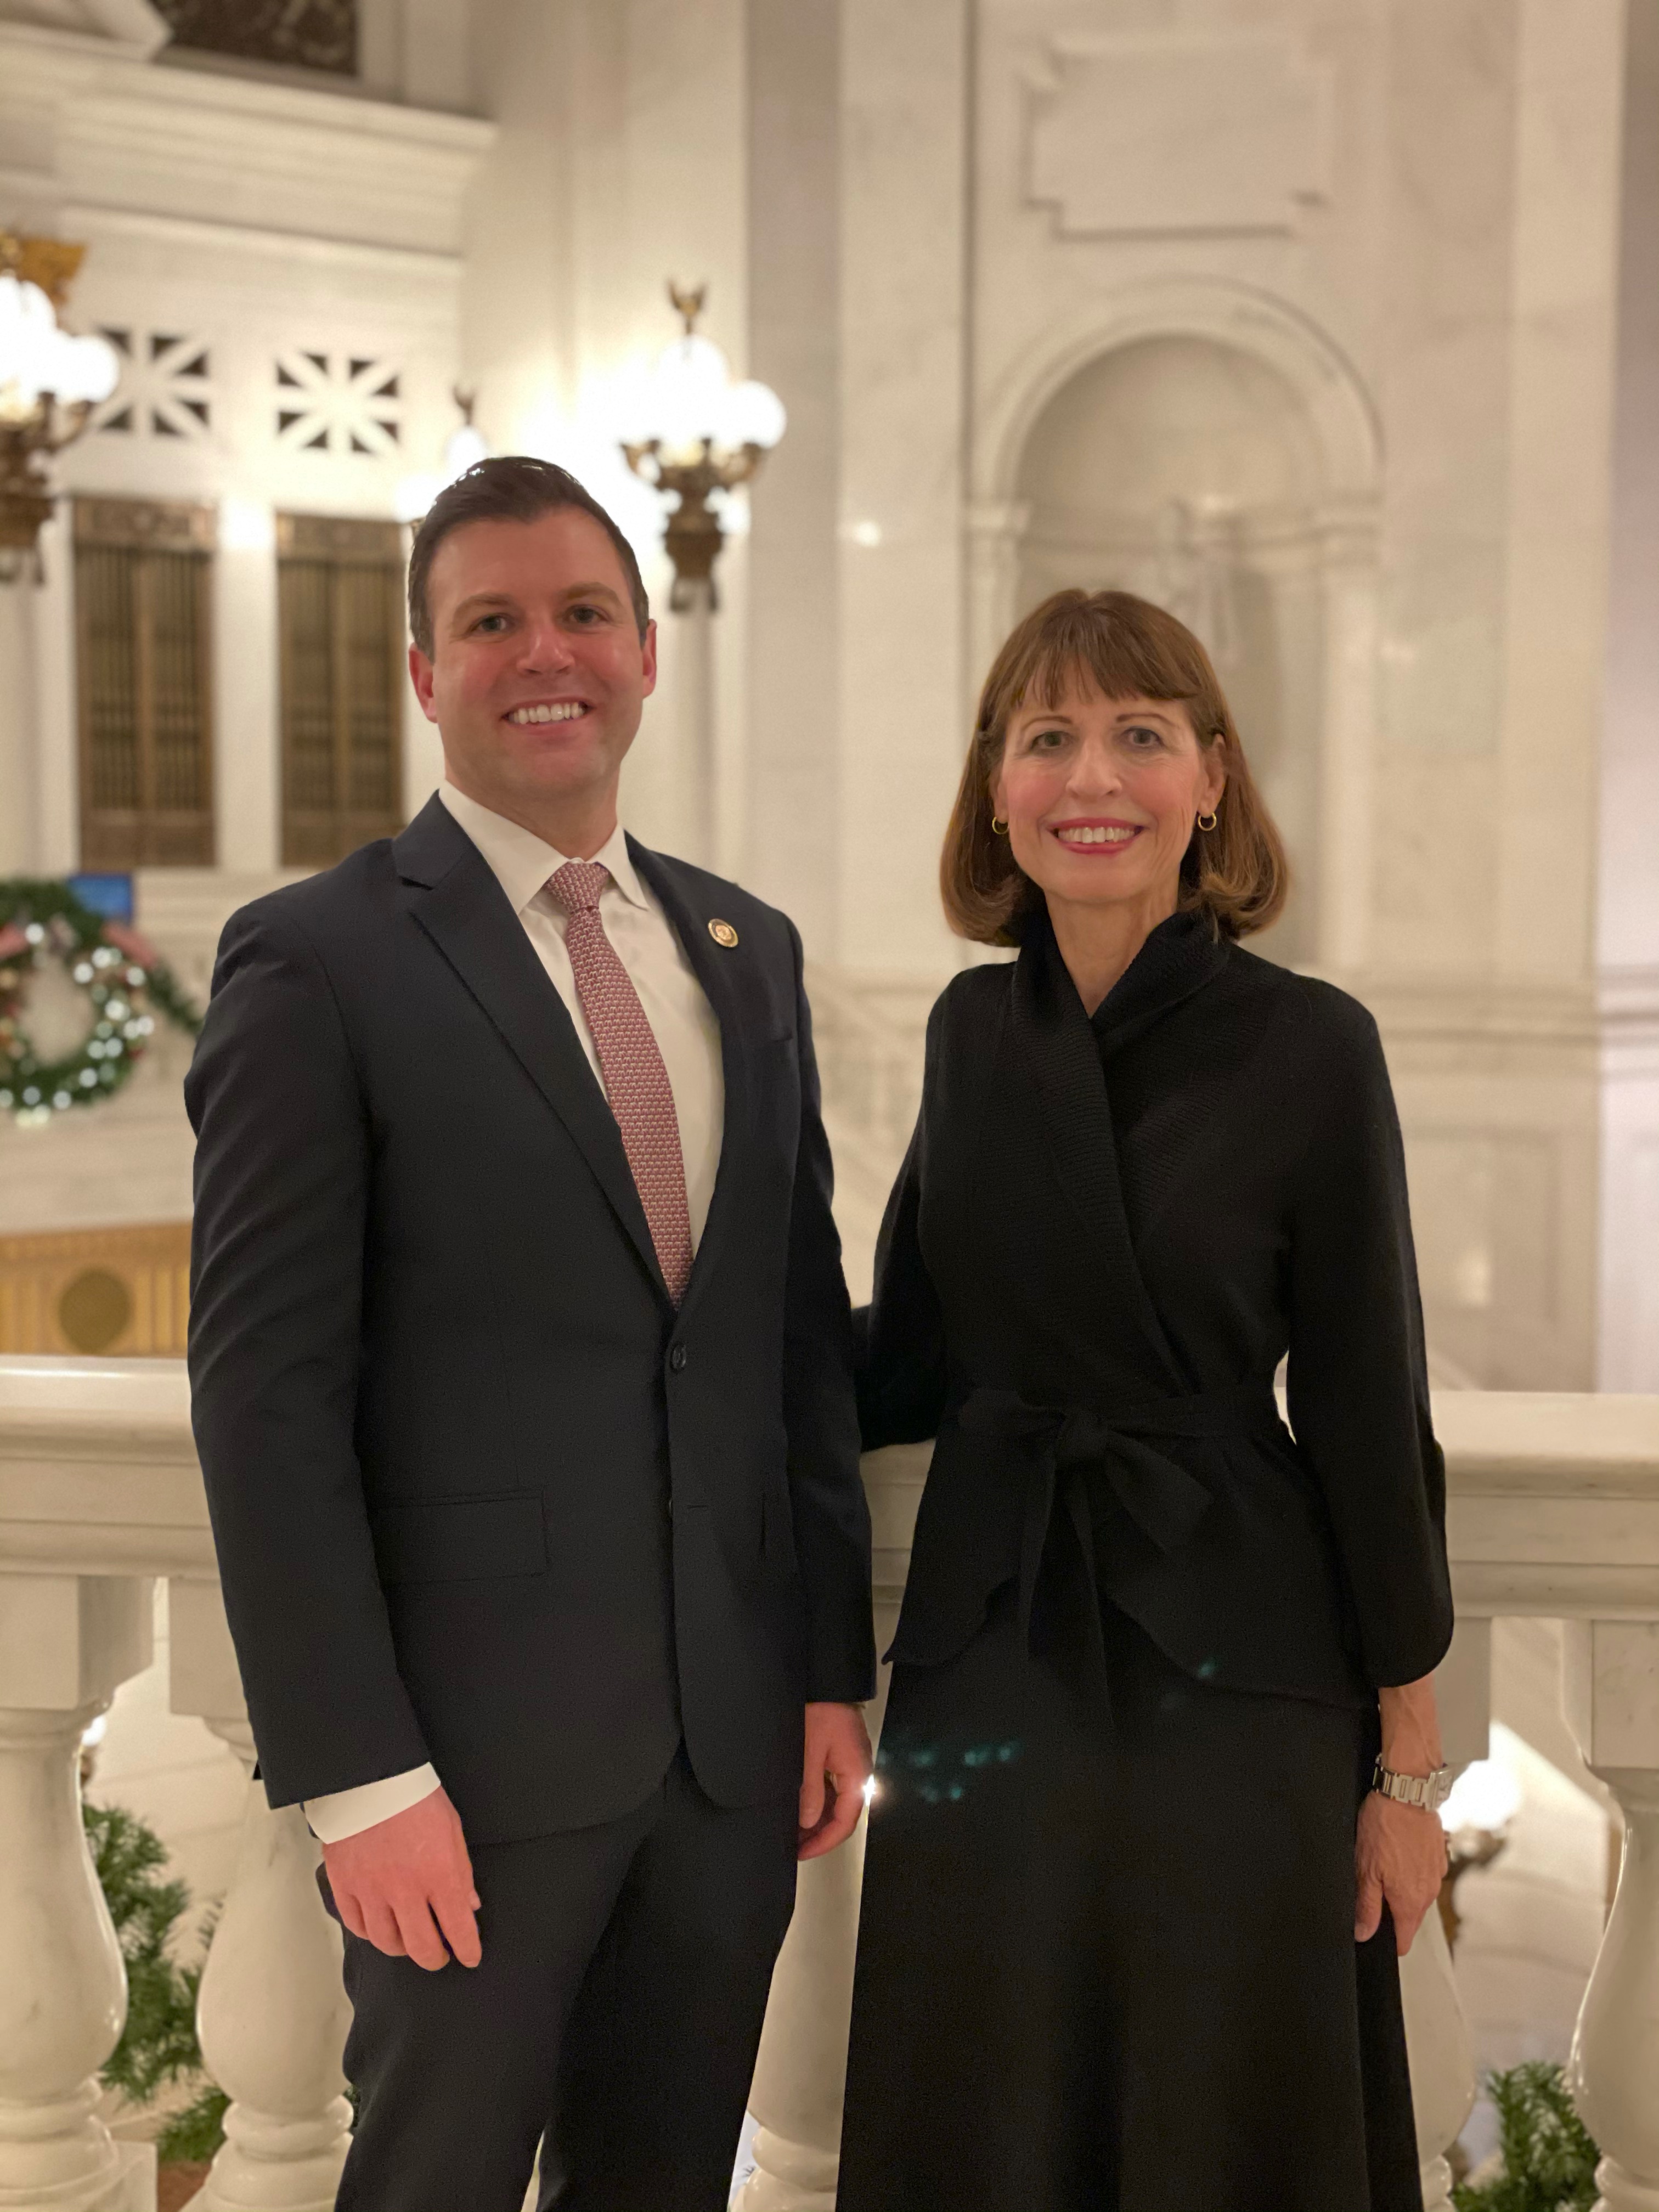 Lehigh Valley Legislators Become First Mother-Son Duo to Serve in the PA House of Representatives 